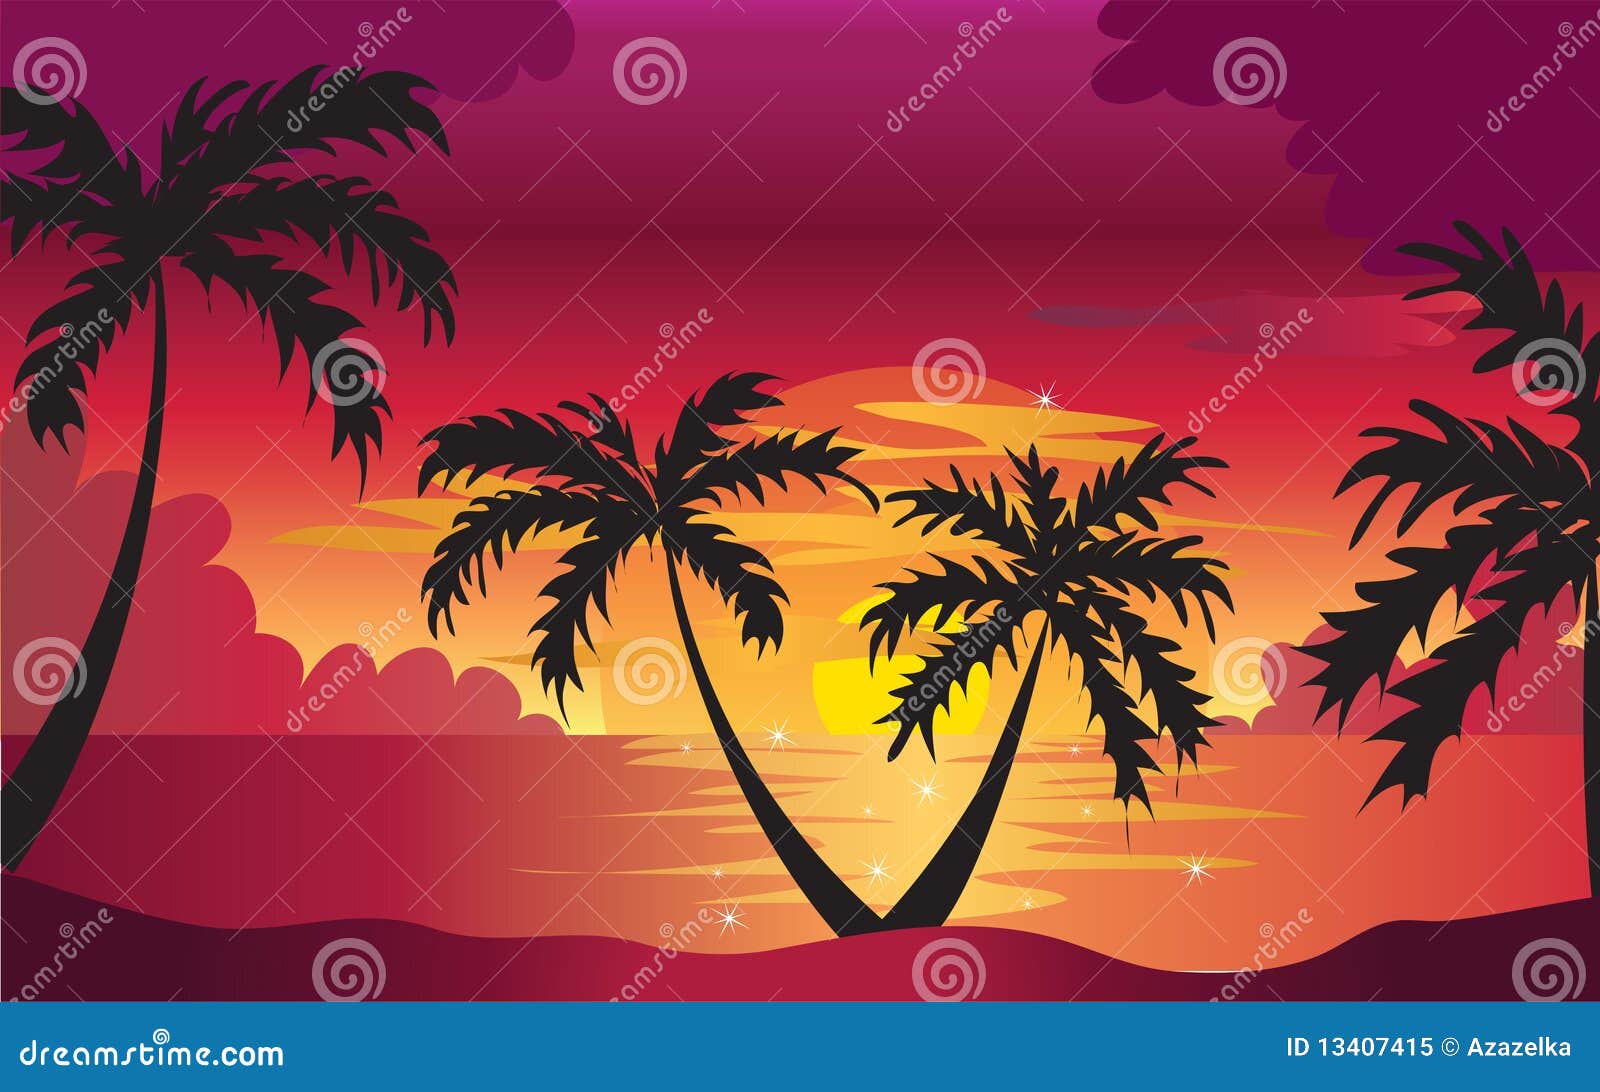 Summer sunset stock vector. Illustration of nature, vacations - 13407415